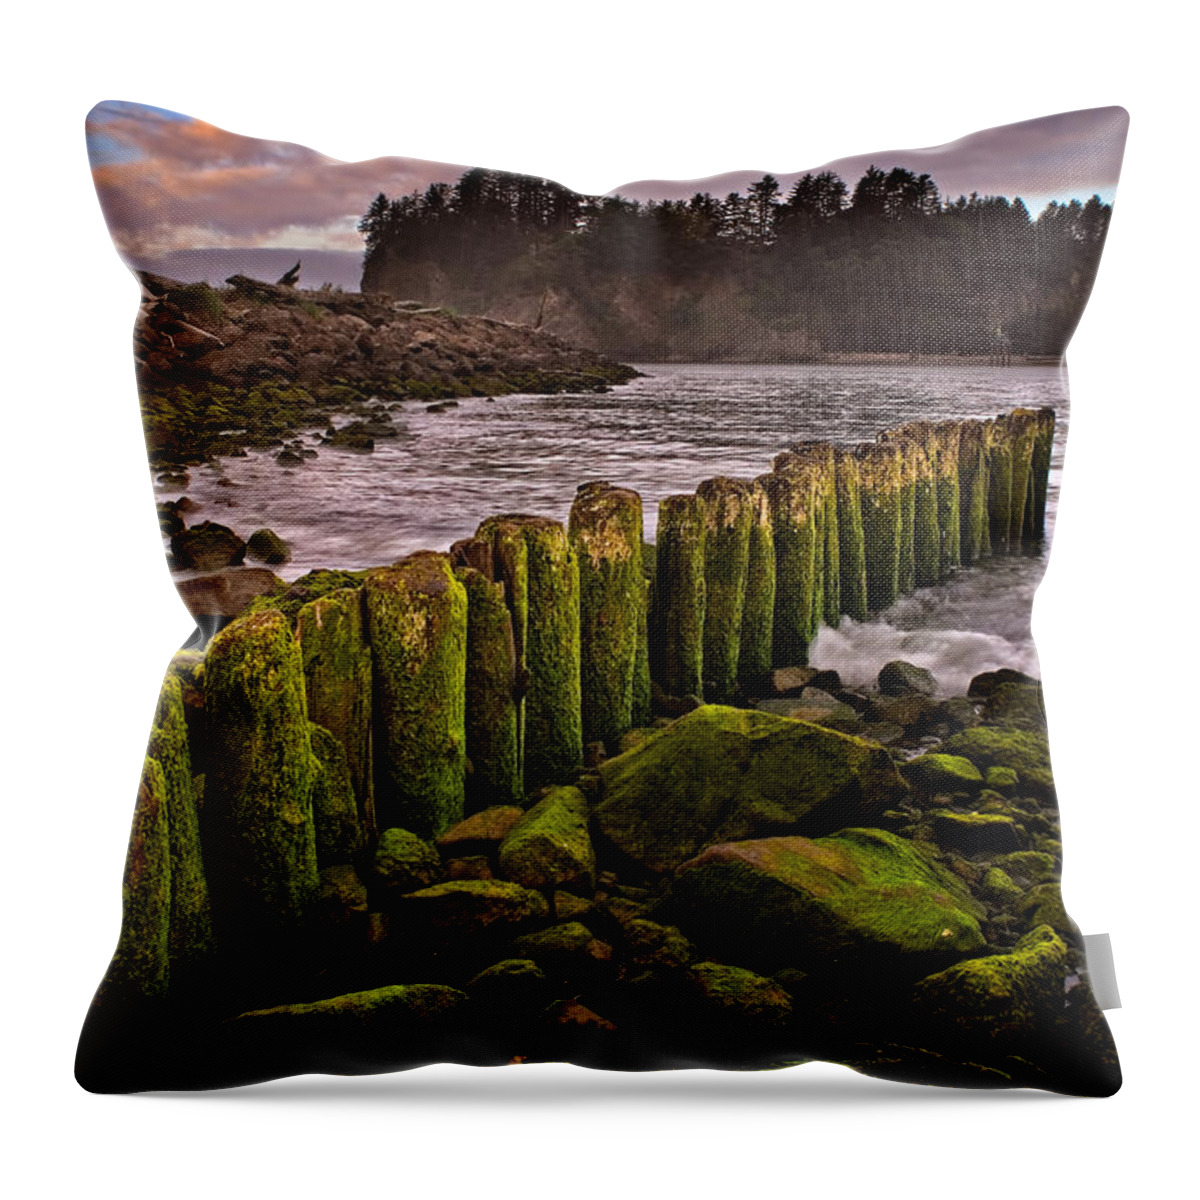 2011 Throw Pillow featuring the photograph La Push by Robert Charity